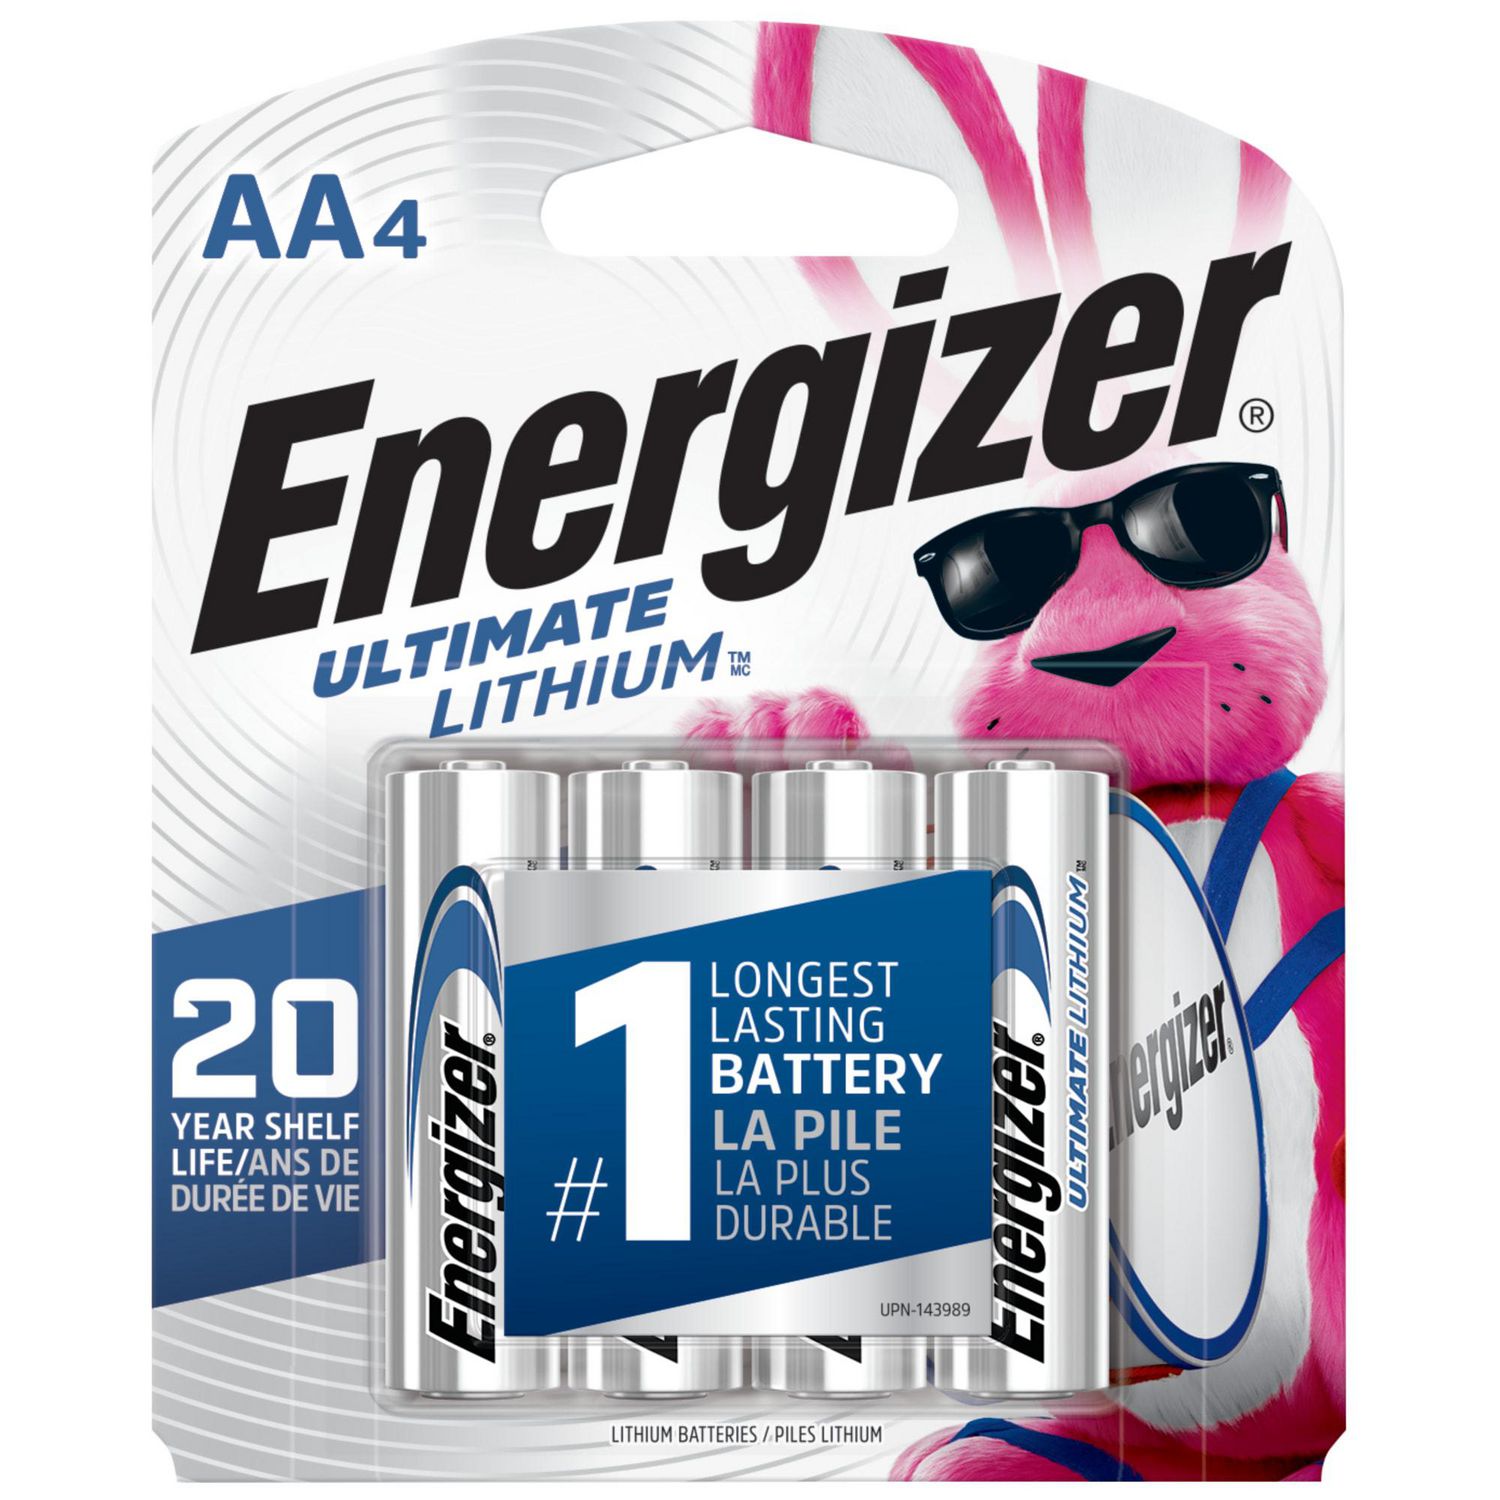 Energizer Ultimate Lithium AA Batteries (4 Pack), Double A